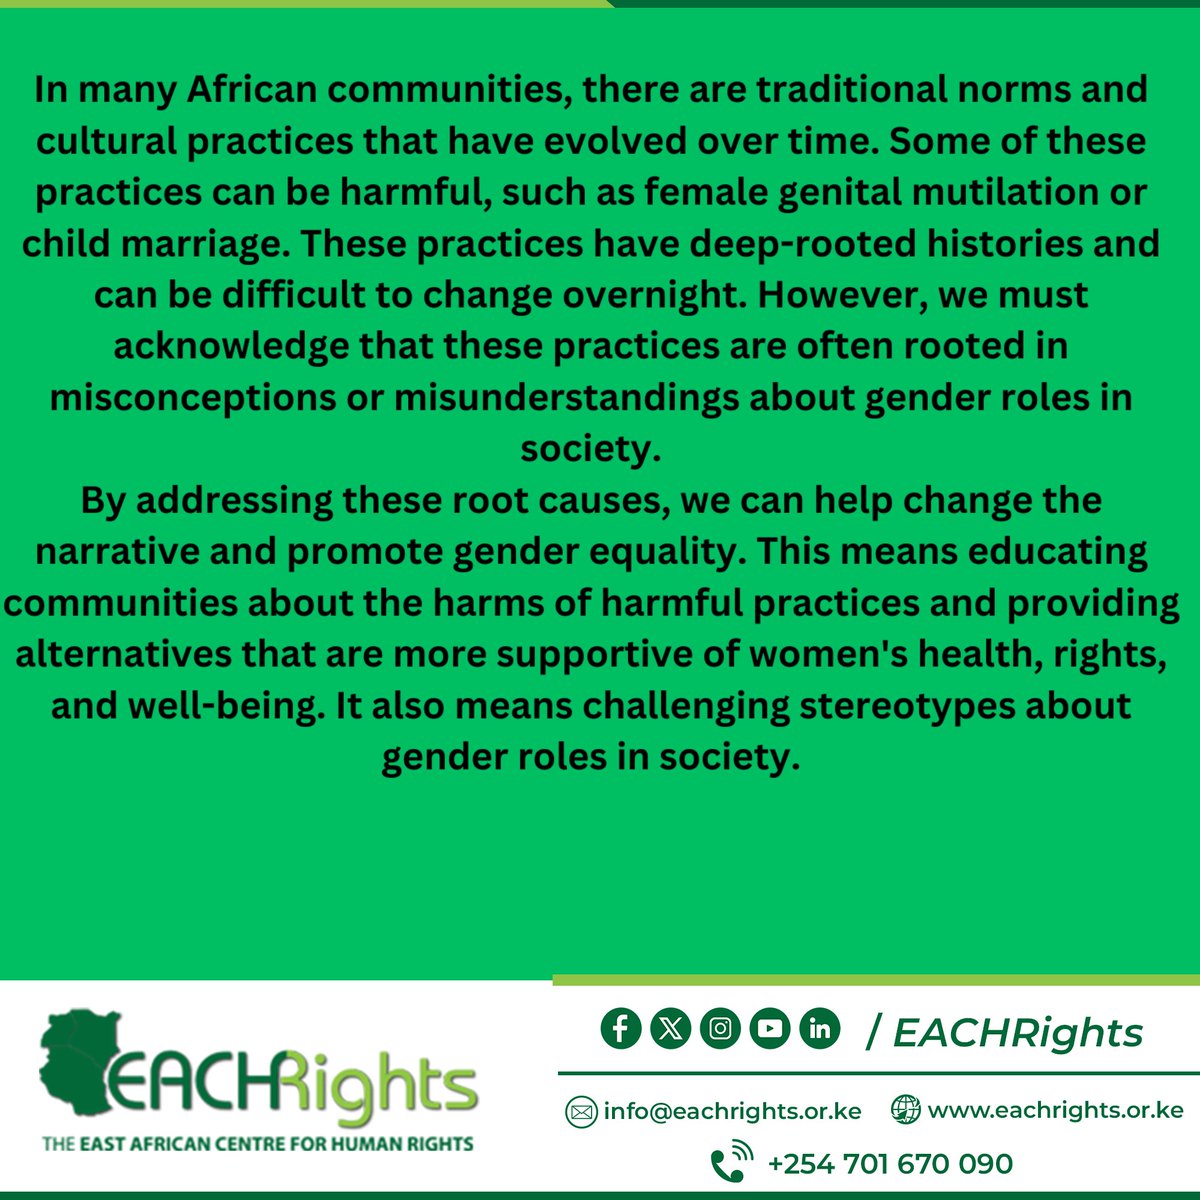 By promoting gender equality, we can create a safer and more prosperous Africa for all genders. This will lead to increased opportunities for women in the workforce, better access to education and healthcare services, and overall improved quality of life.